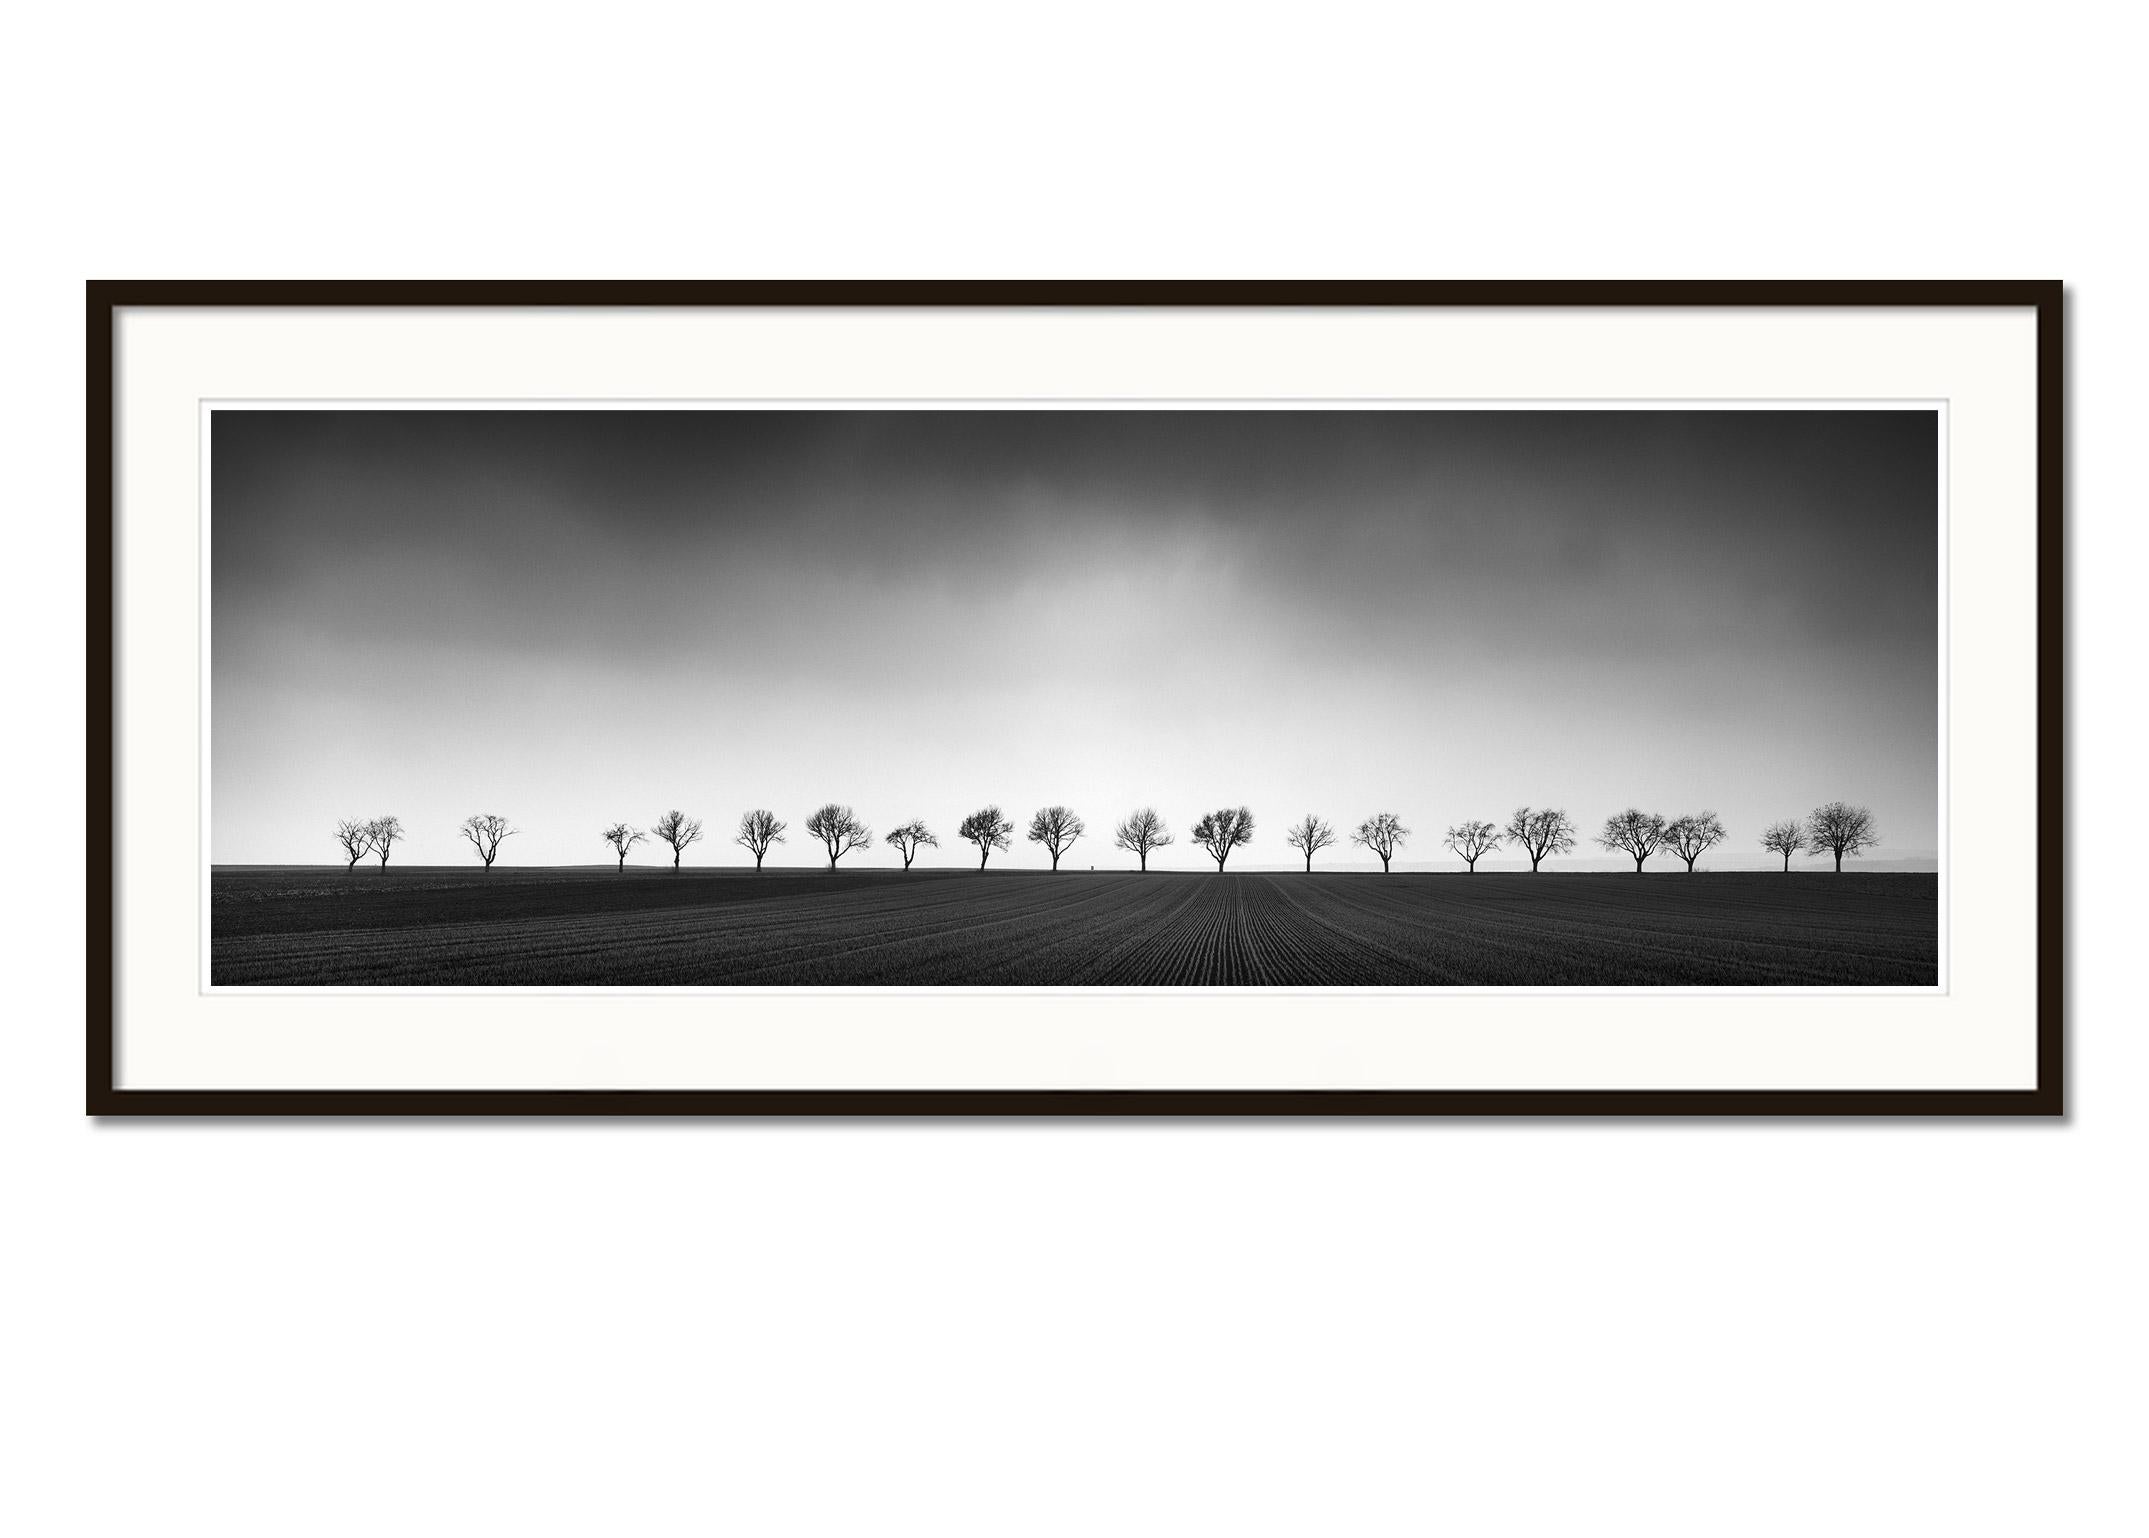 Twenty Cherry Trees, Avenue, Austria, black and white art photography landscapes - Contemporary Photograph by Gerald Berghammer